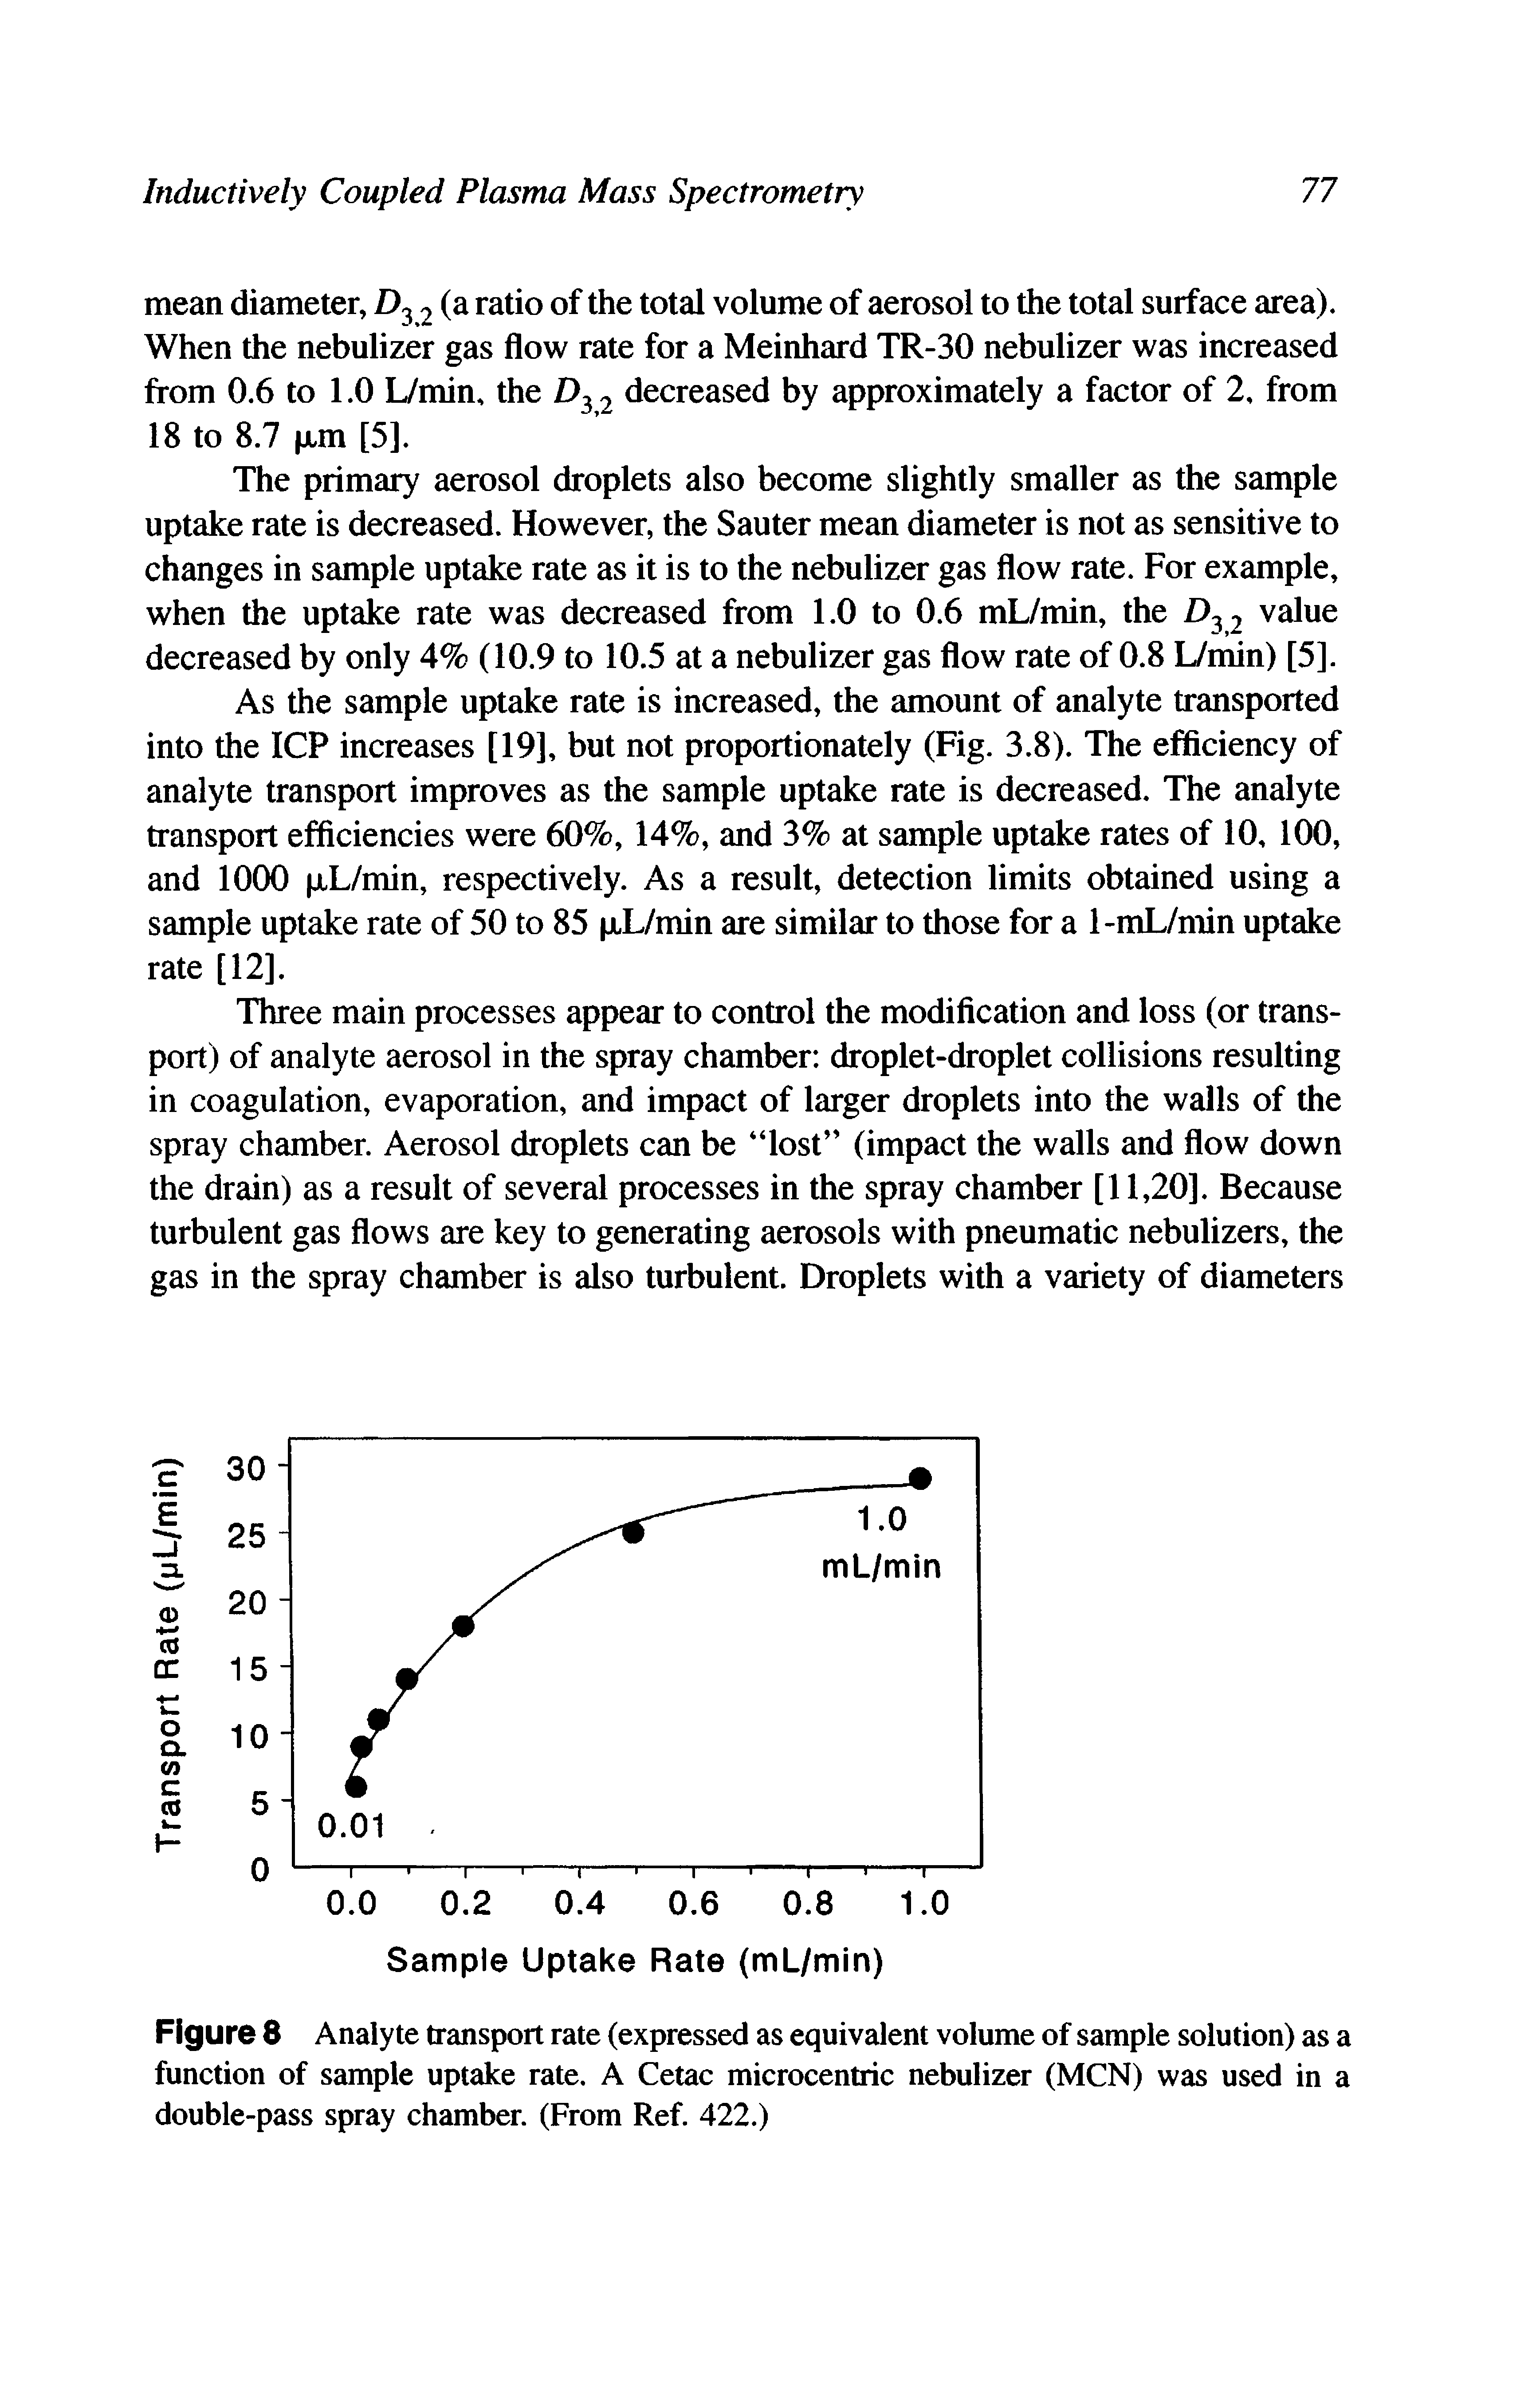 Figure 8 Analyte transport rate (expressed as equivalent volume of sample solution) as a function of sample uptake rate. A Cetac microcentric nebulizer (MCN) was used in a double-pass spray chamber. (From Ref. 422.)...